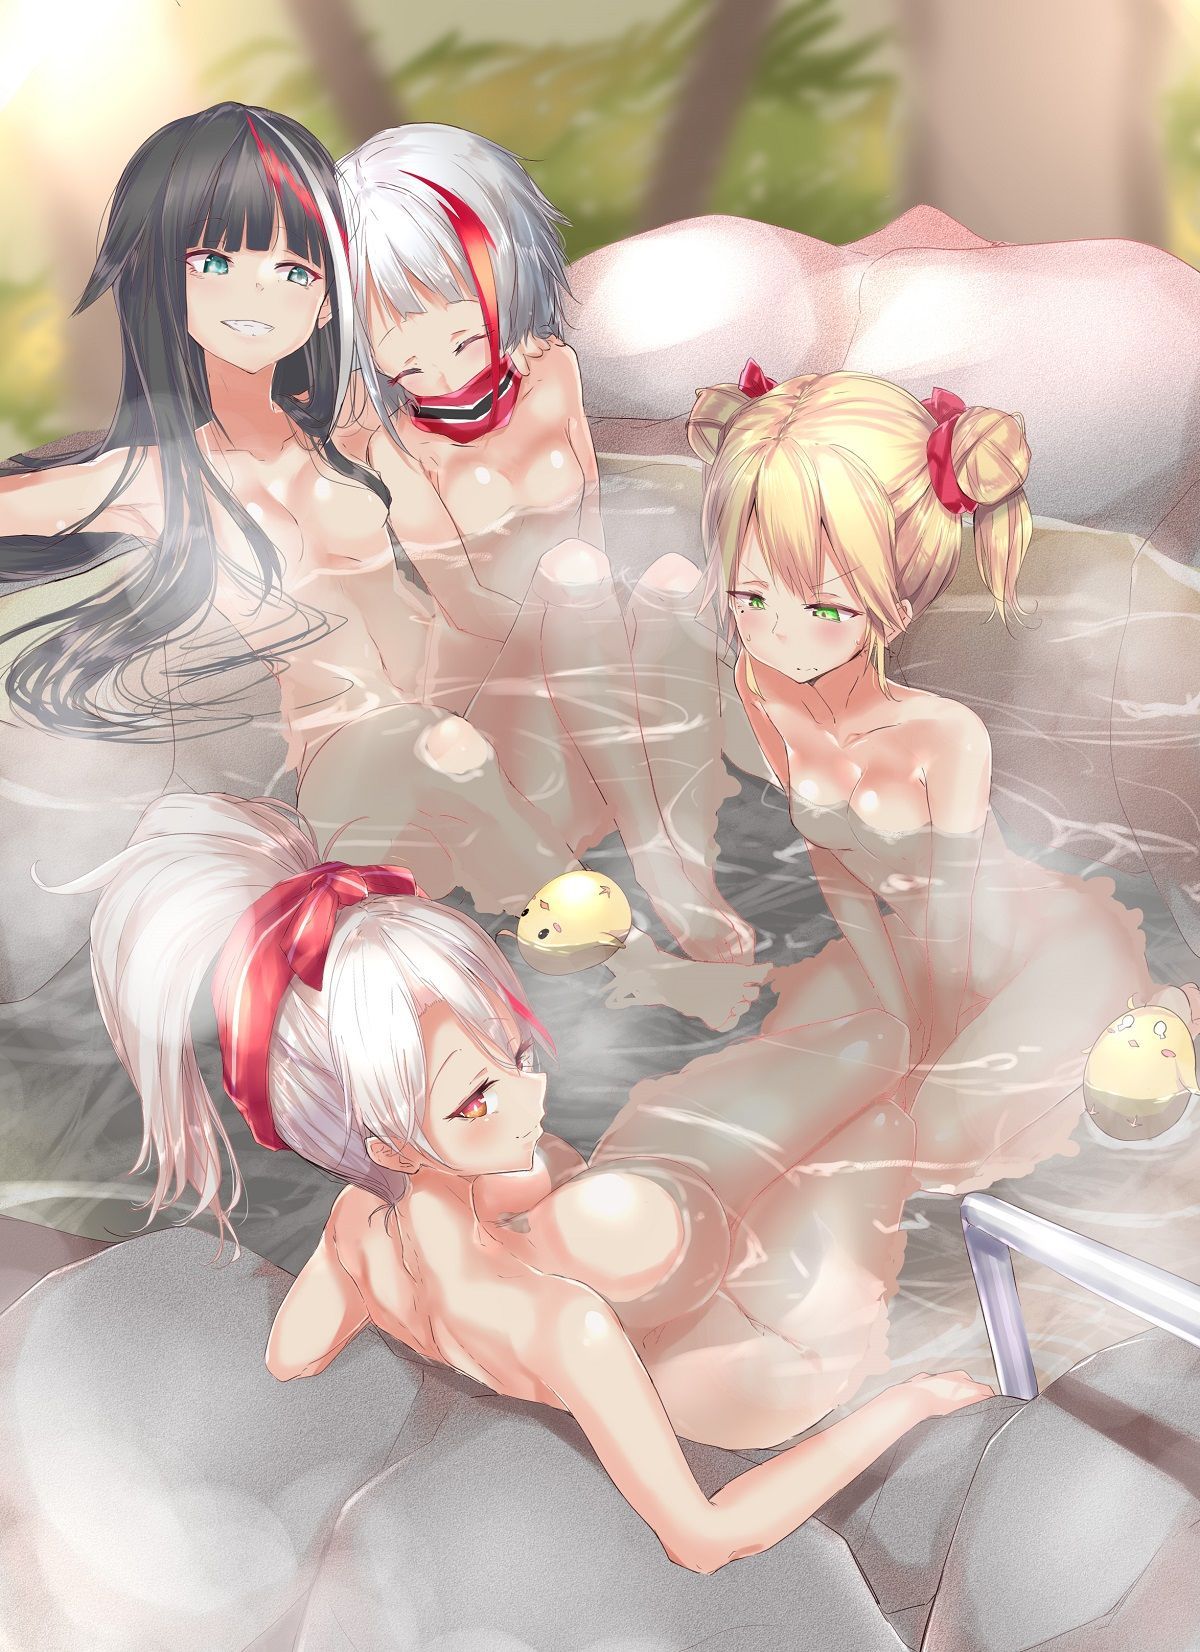 Erotic anime summary Beautiful girls relaxing in baths and hot springs [secondary erotic] 19